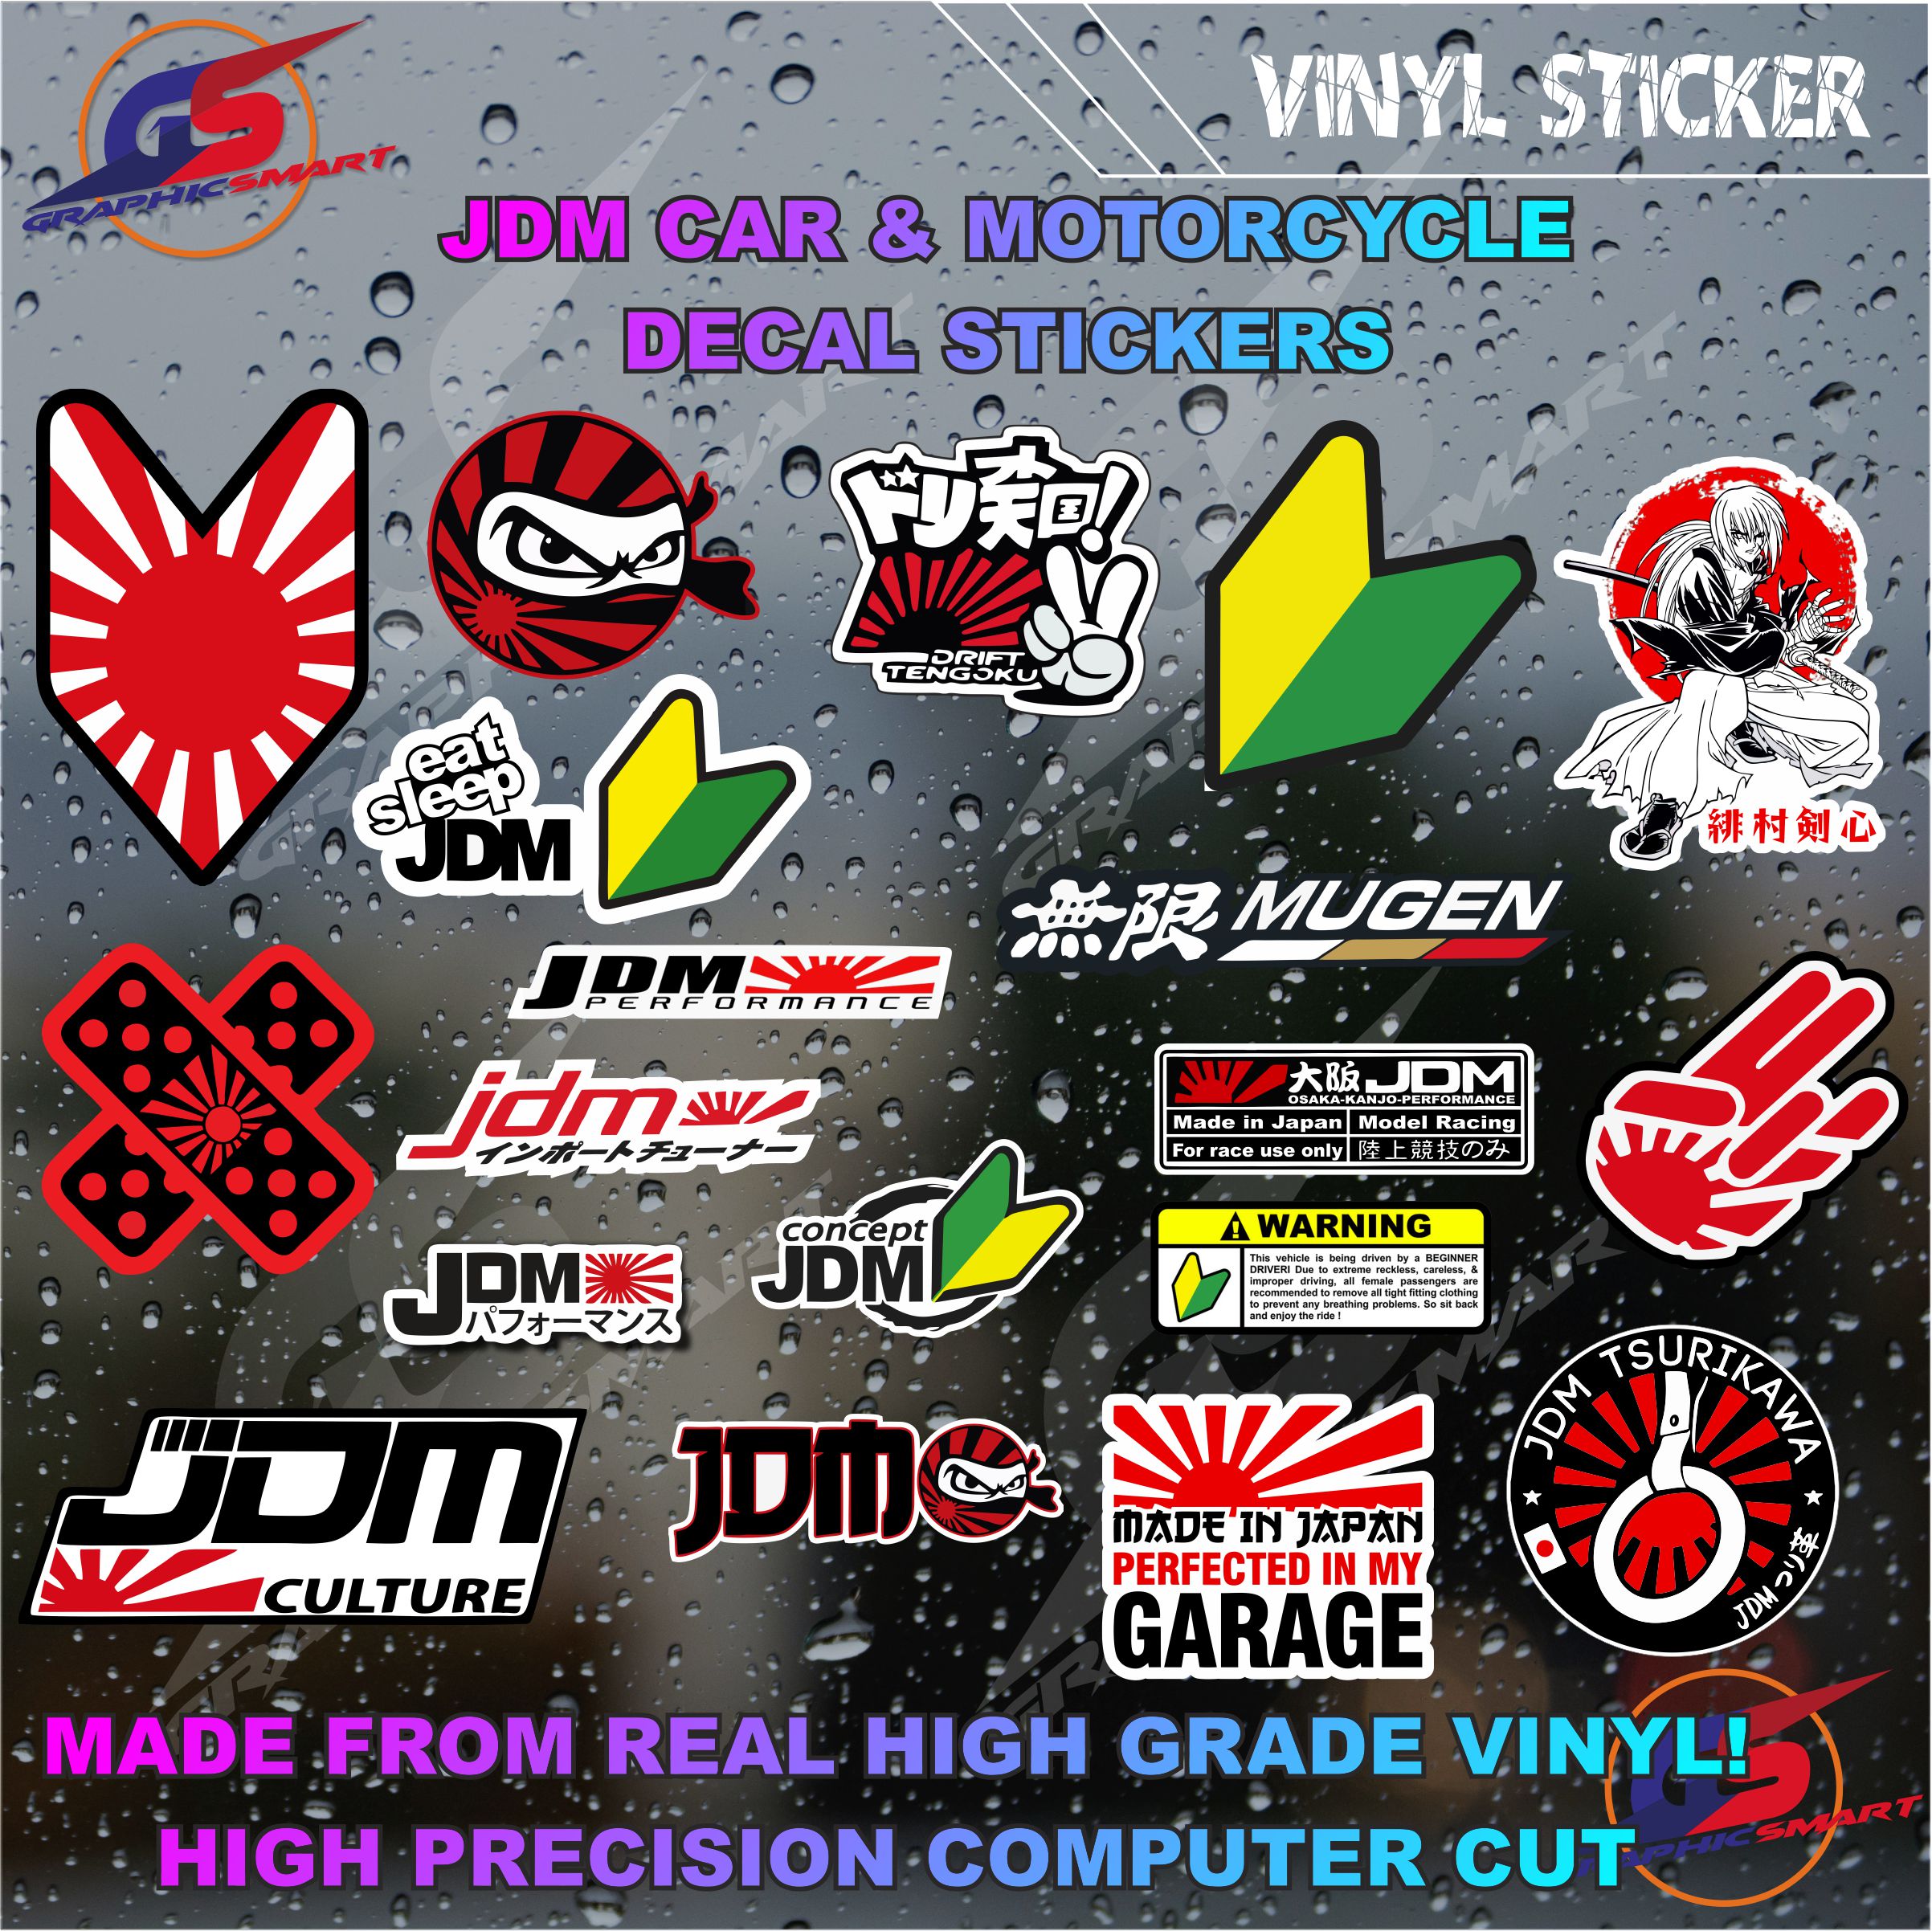 JDM Stickers 5 inches each High Quality Print Vinyl Weather Proof